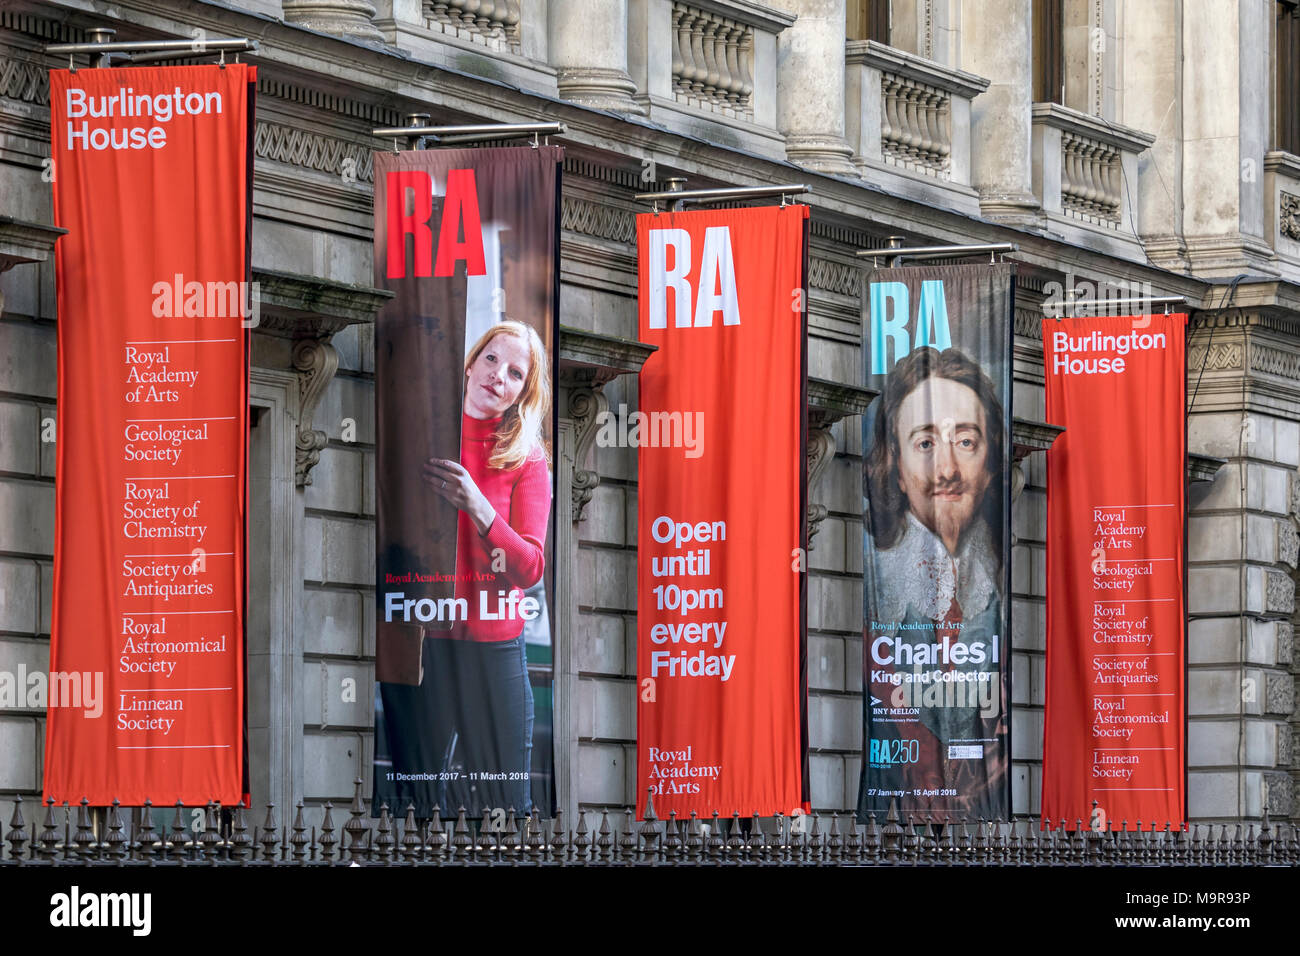 LONDON, UK - MARCH 08, 2018:  Colourful banners for Royal Academy of Arts outside Burlington House Stock Photo